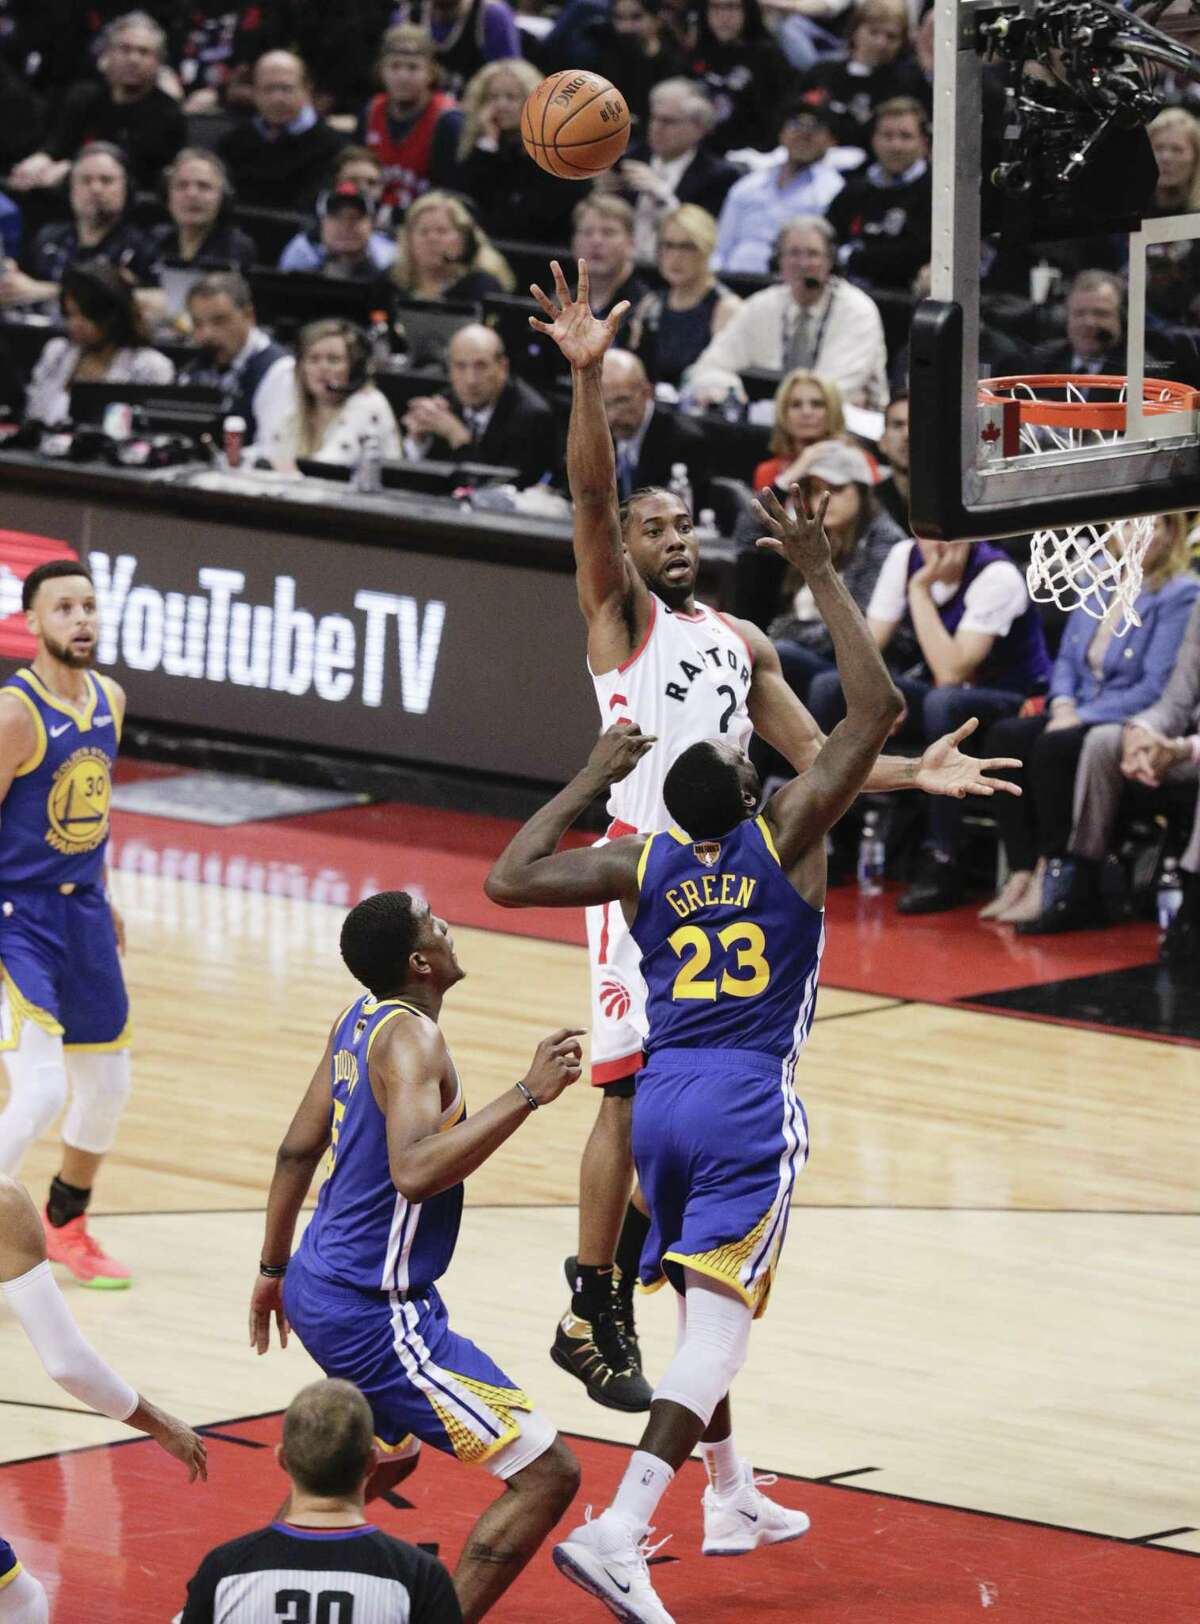 Toronto Raptors’ Kawhi Leonard shoots over Golden State Warriors’ Draymond Green in the third quarter during game 1 of the NBA Finals between the Golden State Warriors and the Toronto Raptors at Scotiabank Arena on Thursday, May 30, 2019 in Toronto, Ontario, Canada.